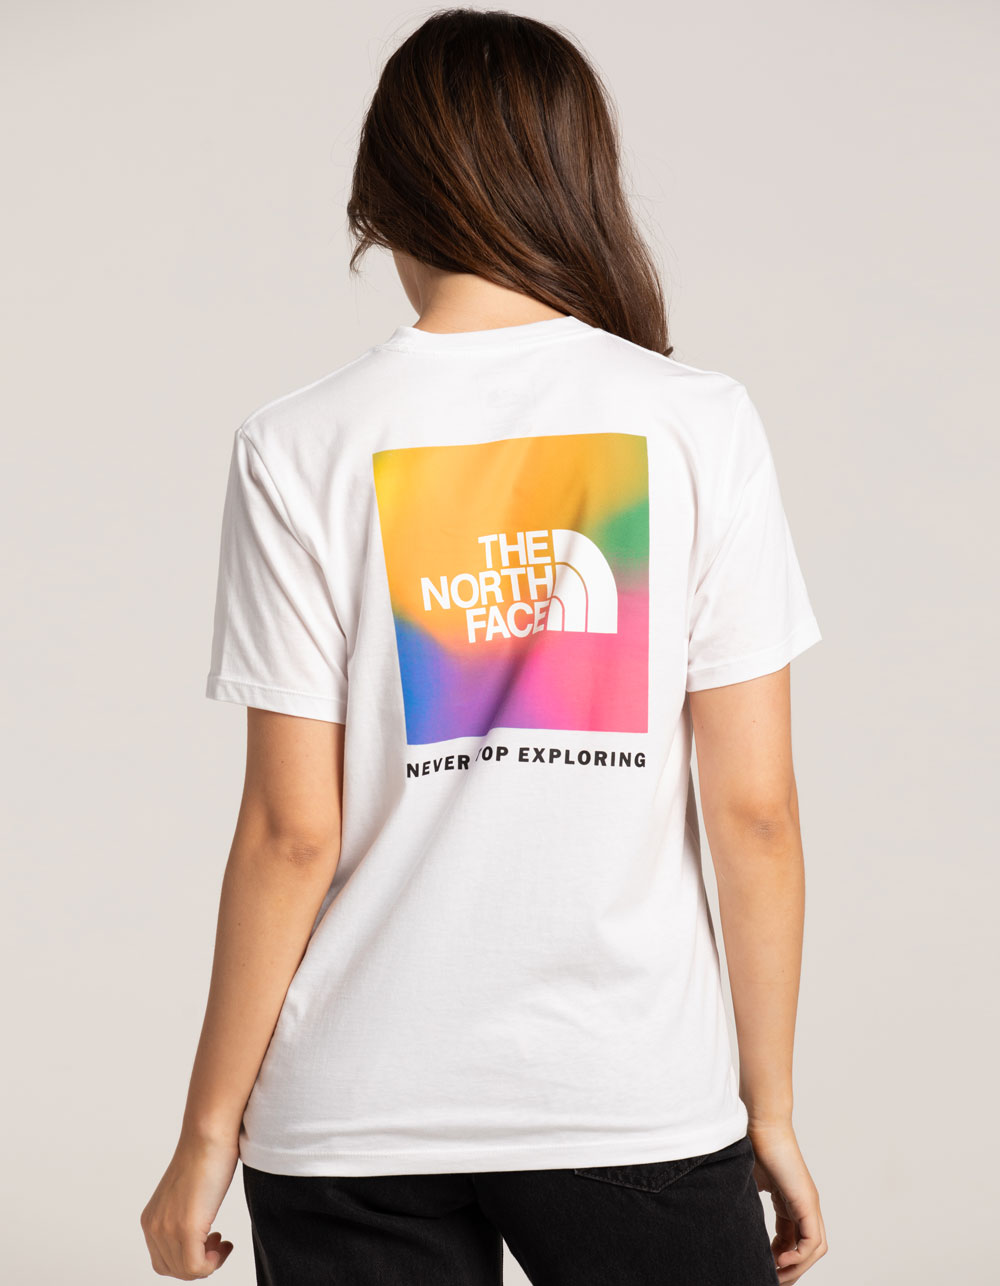 THE NORTH FACE Never Stop Exploring Womens Tee - WHITE/MULTI | Tillys